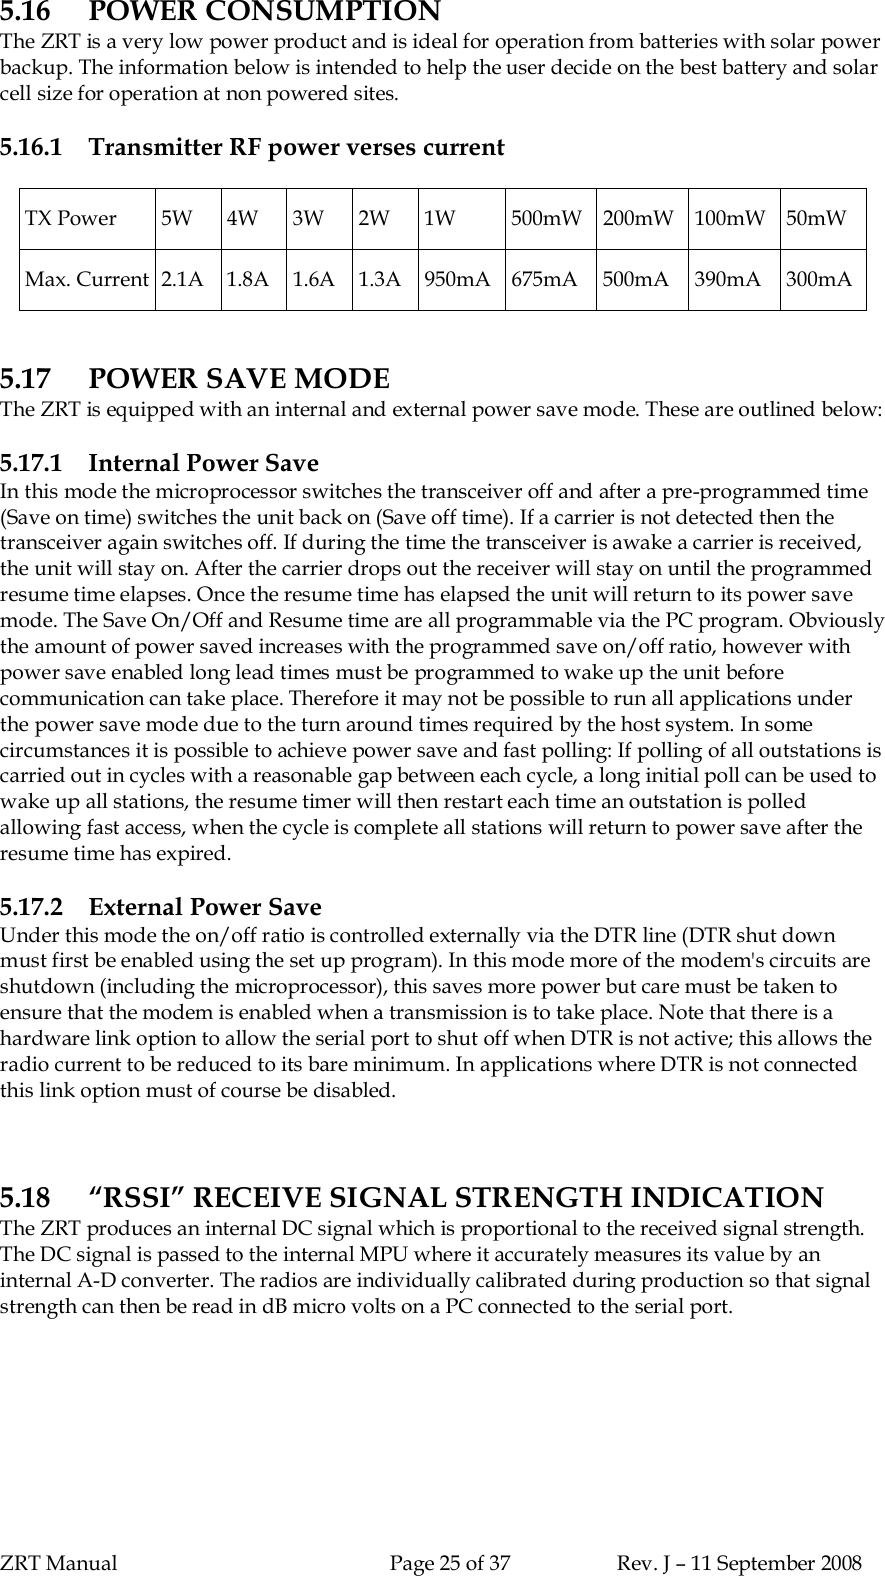 ZRT Manual Page 25 of 37 Rev. J – 11 September 20085.16 POWER CONSUMPTIONThe ZRT is a very low power product and is ideal for operation from batteries with solar powerbackup. The information below is intended to help the user decide on the best battery and solarcell size for operation at non powered sites.5.16.1 Transmitter RF power verses currentTX Power 5W 4W 3W 2W 1W 500mW 200mW 100mW 50mWMax. Current 2.1A 1.8A 1.6A 1.3A 950mA 675mA 500mA 390mA 300mA5.17 POWER SAVE MODEThe ZRT is equipped with an internal and external power save mode. These are outlined below:5.17.1 Internal Power SaveIn this mode the microprocessor switches the transceiver off and after a pre-programmed time(Save on time) switches the unit back on (Save off time). If a carrier is not detected then thetransceiver again switches off. If during the time the transceiver is awake a carrier is received,the unit will stay on. After the carrier drops out the receiver will stay on until the programmedresume time elapses. Once the resume time has elapsed the unit will return to its power savemode. The Save On/Off and Resume time are all programmable via the PC program. Obviouslythe amount of power saved increases with the programmed save on/off ratio, however withpower save enabled long lead times must be programmed to wake up the unit beforecommunication can take place. Therefore it may not be possible to run all applications underthe power save mode due to the turn around times required by the host system. In somecircumstances it is possible to achieve power save and fast polling: If polling of all outstations iscarried out in cycles with a reasonable gap between each cycle, a long initial poll can be used towake up all stations, the resume timer will then restart each time an outstation is polledallowing fast access, when the cycle is complete all stations will return to power save after theresume time has expired.5.17.2 External Power SaveUnder this mode the on/off ratio is controlled externally via the DTR line (DTR shut downmust first be enabled using the set up program). In this mode more of the modem&apos;s circuits areshutdown (including the microprocessor), this saves more power but care must be taken toensure that the modem is enabled when a transmission is to take place. Note that there is ahardware link option to allow the serial port to shut off when DTR is not active; this allows theradio current to be reduced to its bare minimum. In applications where DTR is not connectedthis link option must of course be disabled.5.18 “RSSI” RECEIVE SIGNAL STRENGTH INDICATIONThe ZRT produces an internal DC signal which is proportional to the received signal strength.The DC signal is passed to the internal MPU where it accurately measures its value by aninternal A-D converter. The radios are individually calibrated during production so that signalstrength can then be read in dB micro volts on a PC connected to the serial port.